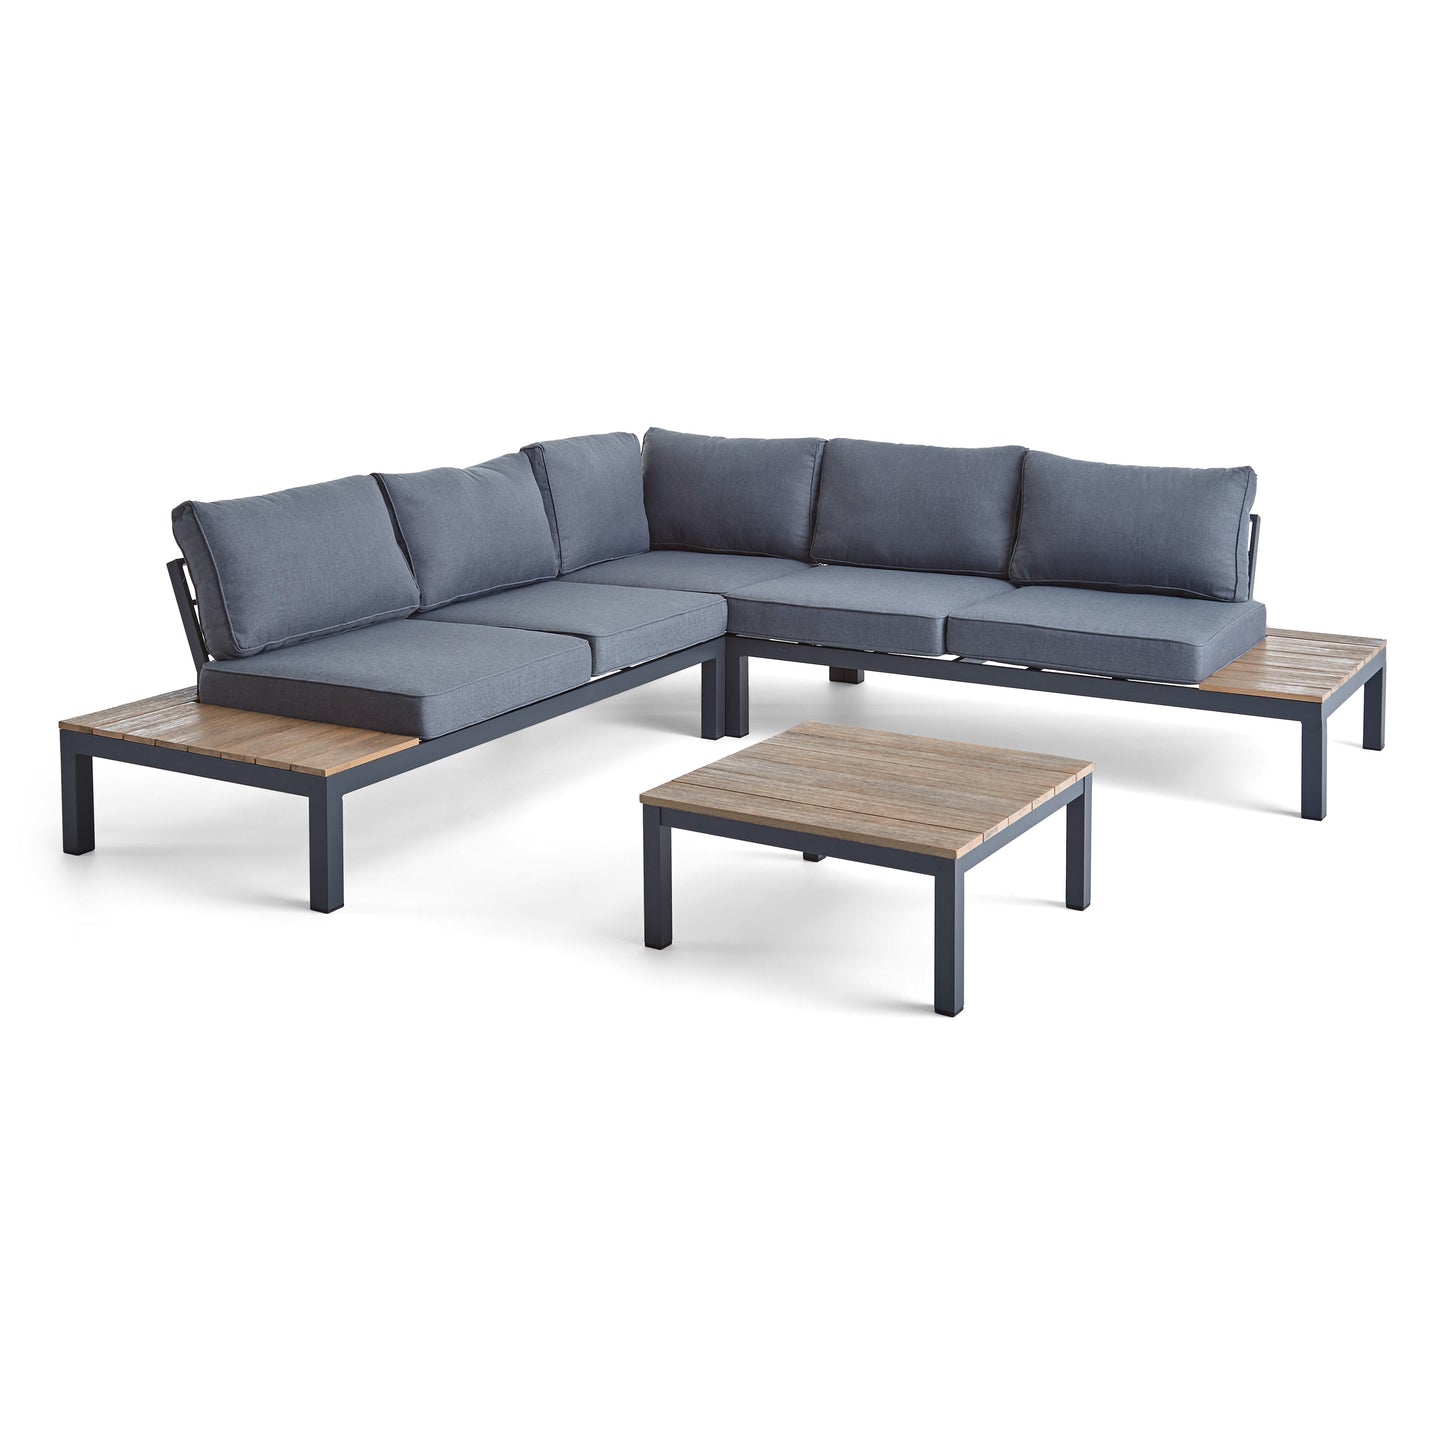 Blessen Outdoor Aluminum and Wood V-Shaped Sofa Set with Cushions